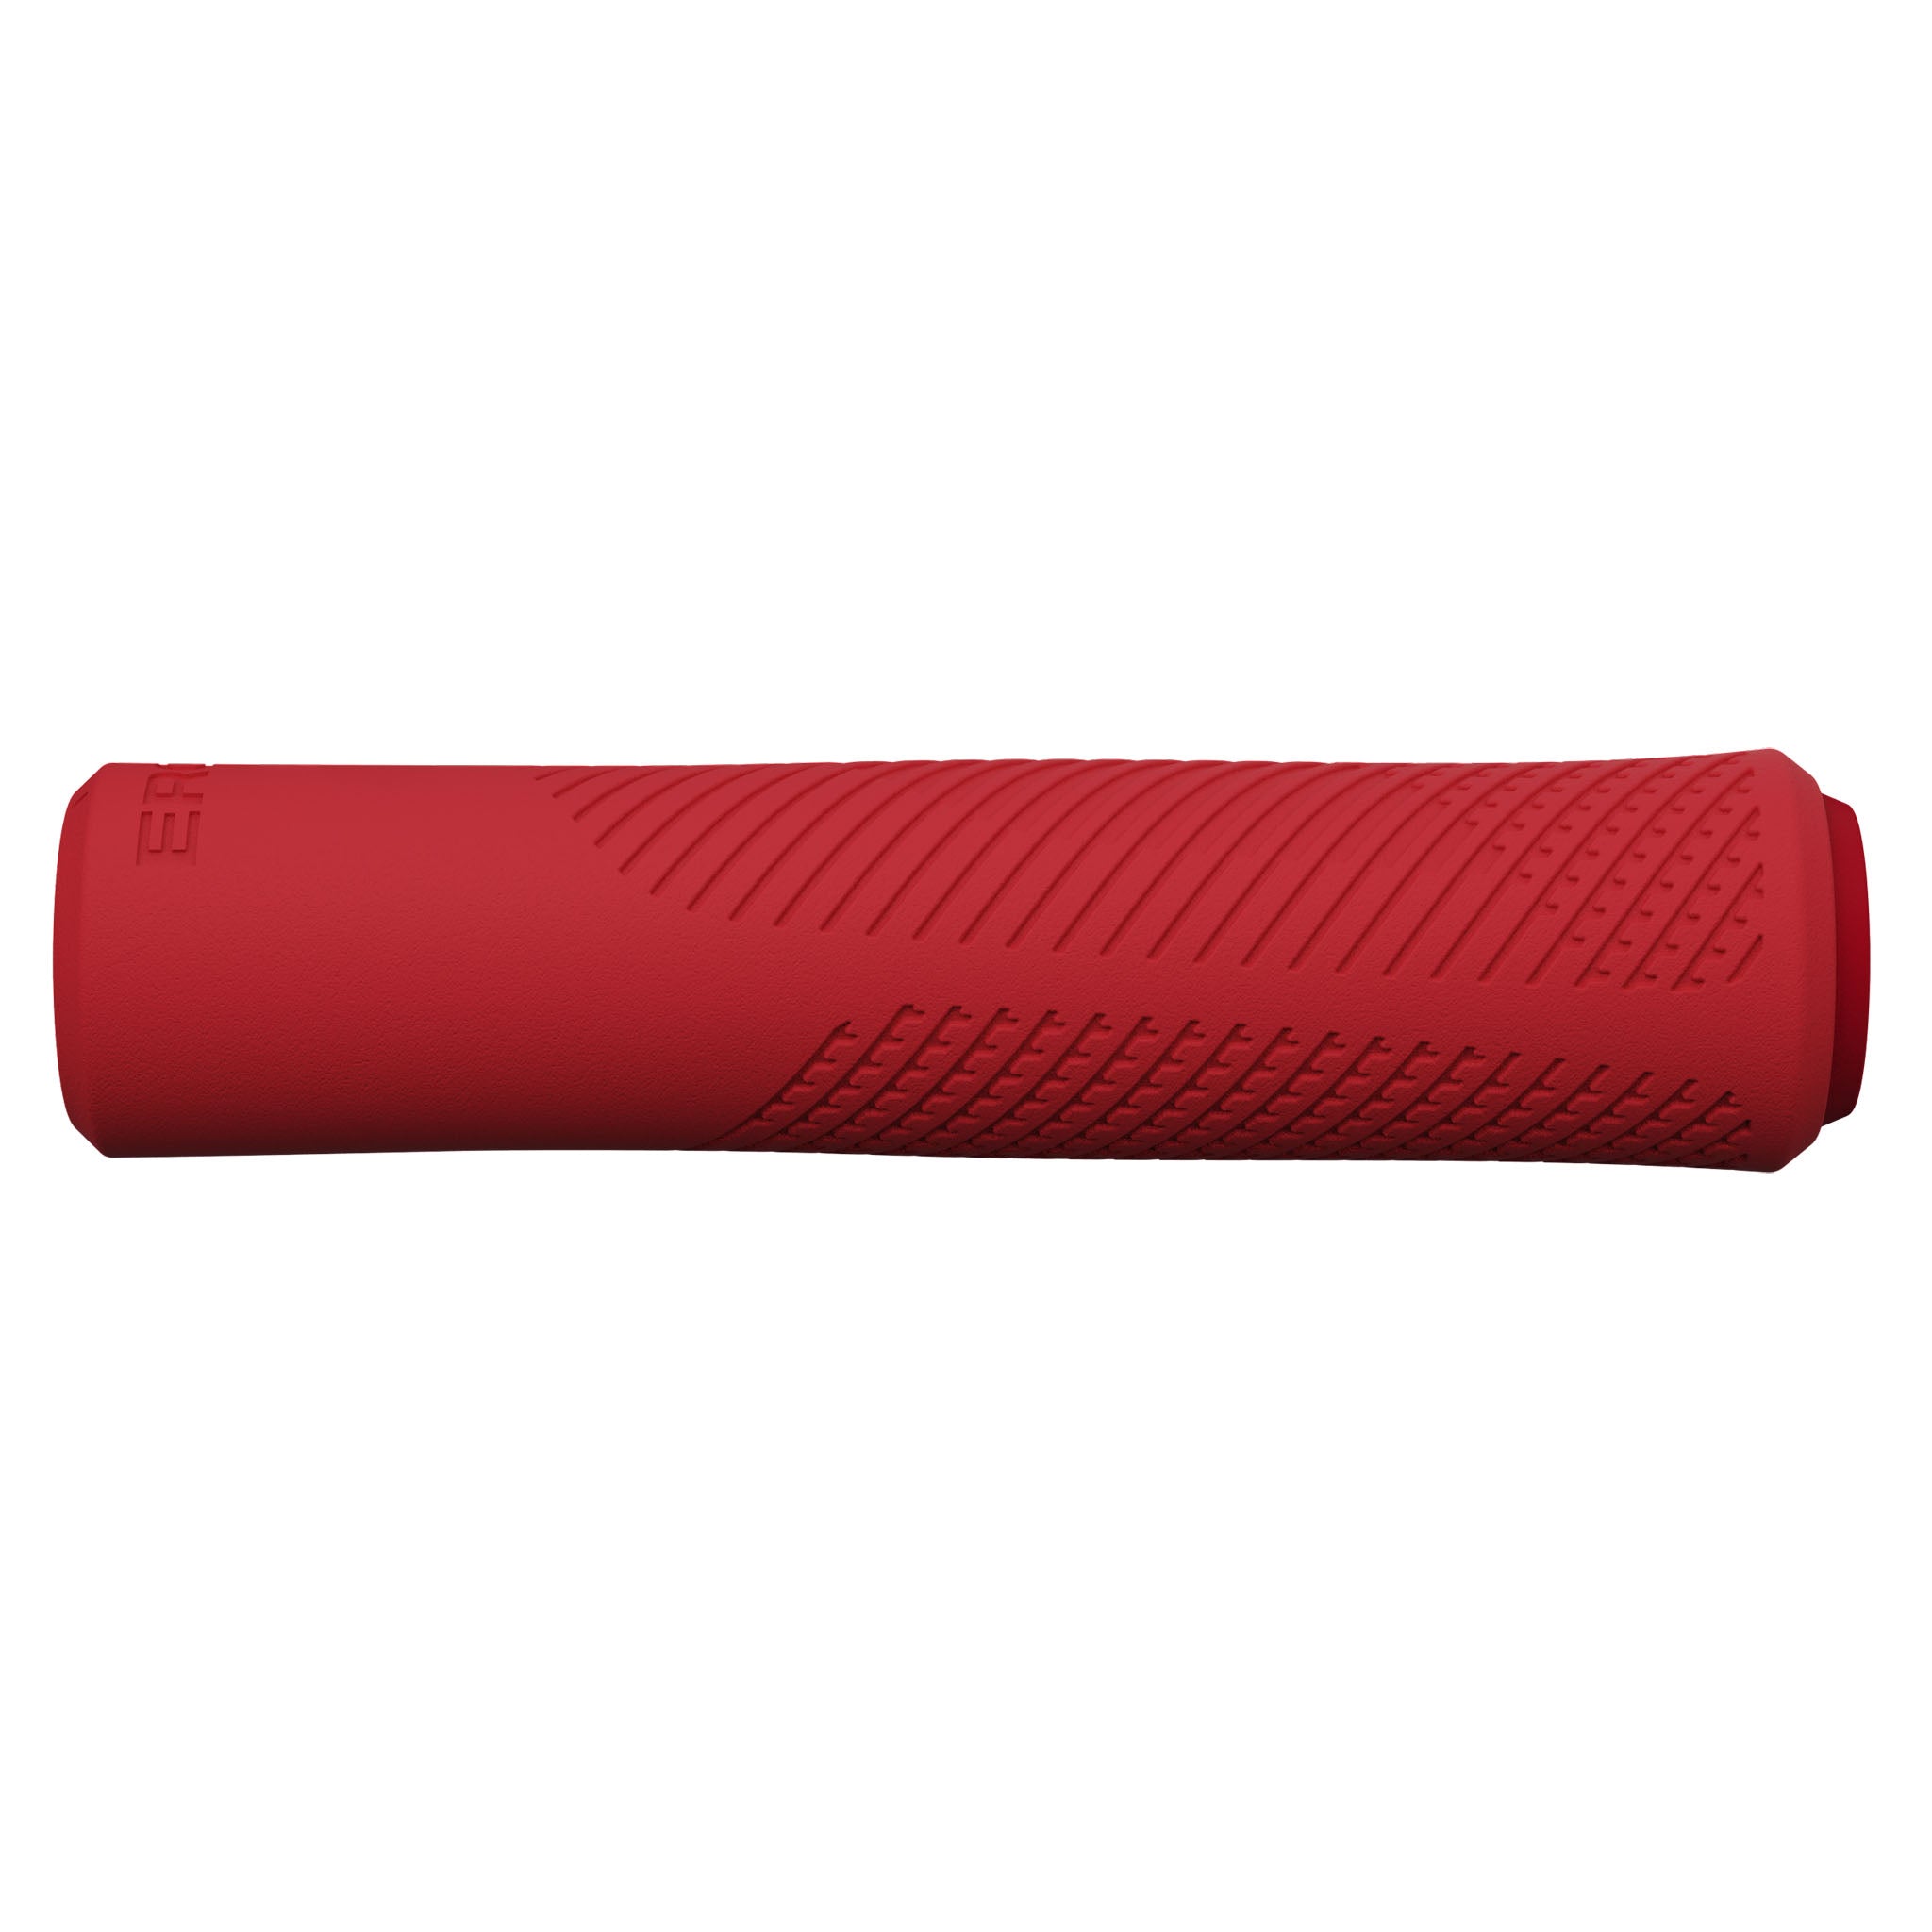 Ergon GXR Grips - Risky Red Large